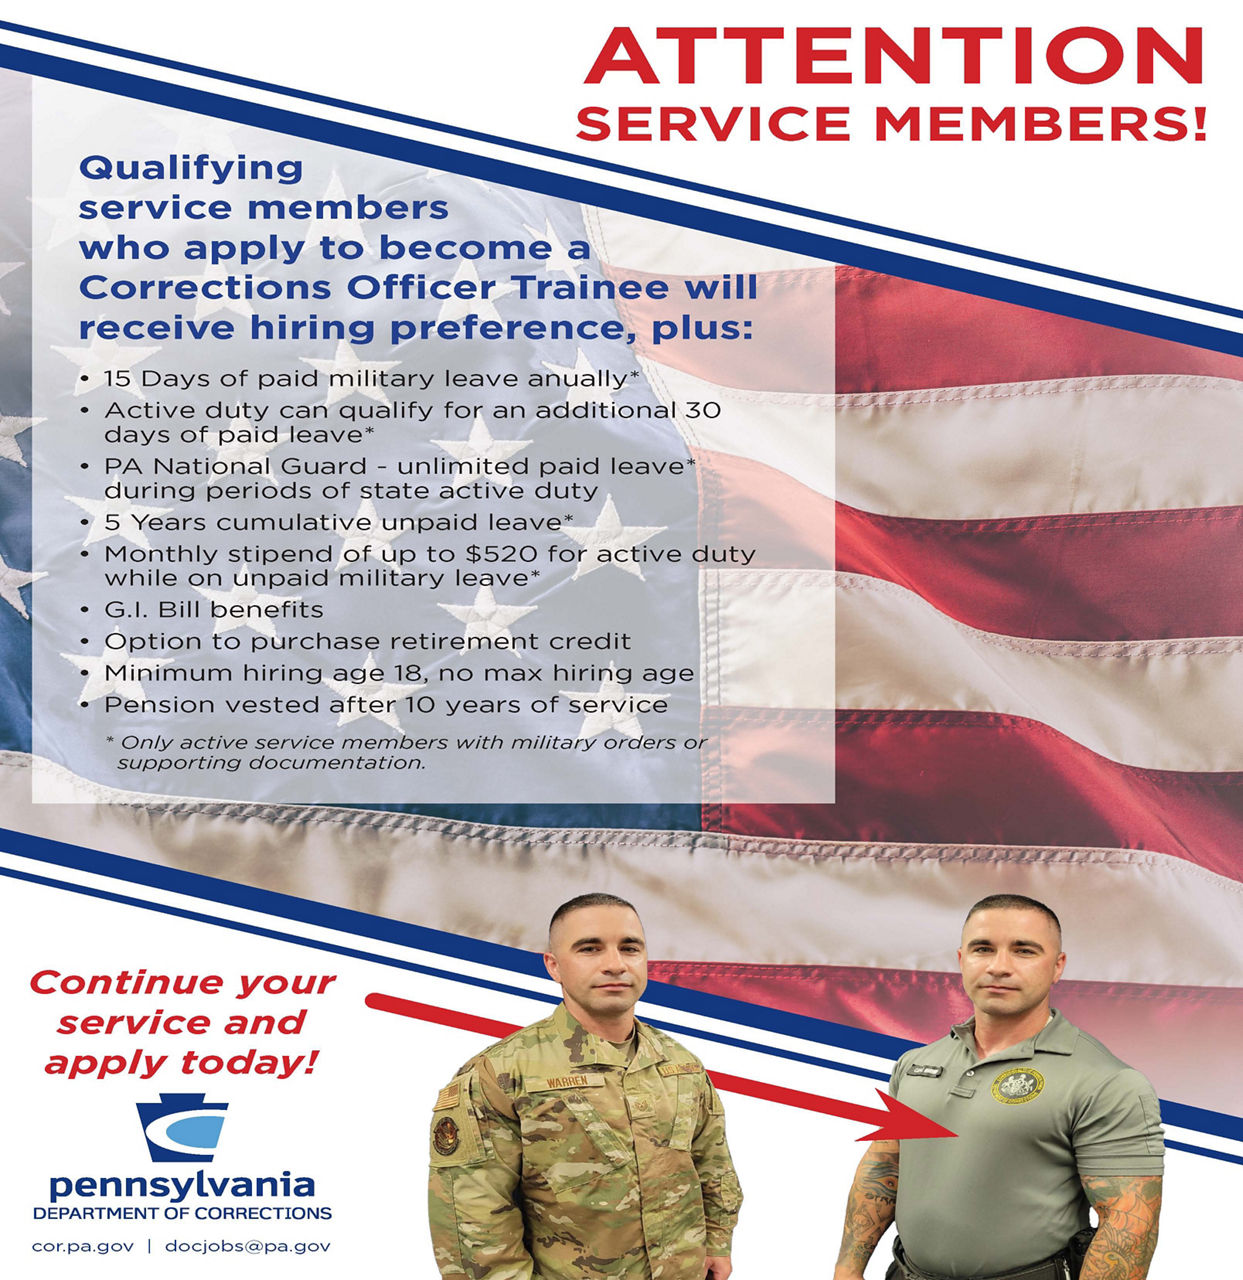 A flyer promoting the benefits service members receive when serving as a corrections officer